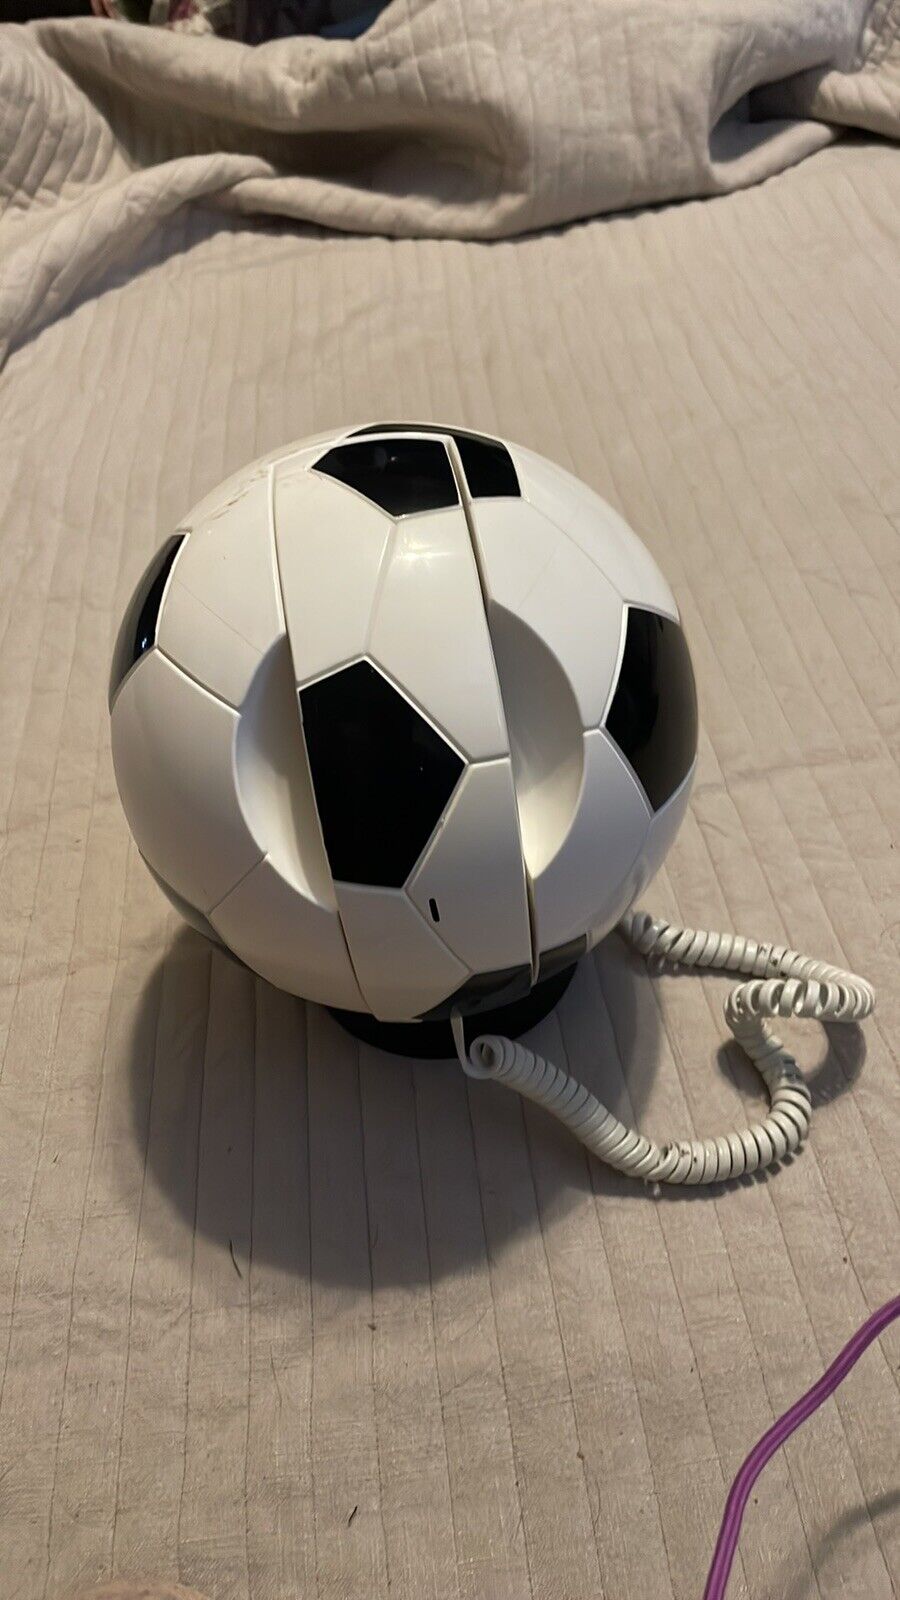 Vintage Soccer Fone Phone Novelty Telephone Football Add a Pic Corded Landline